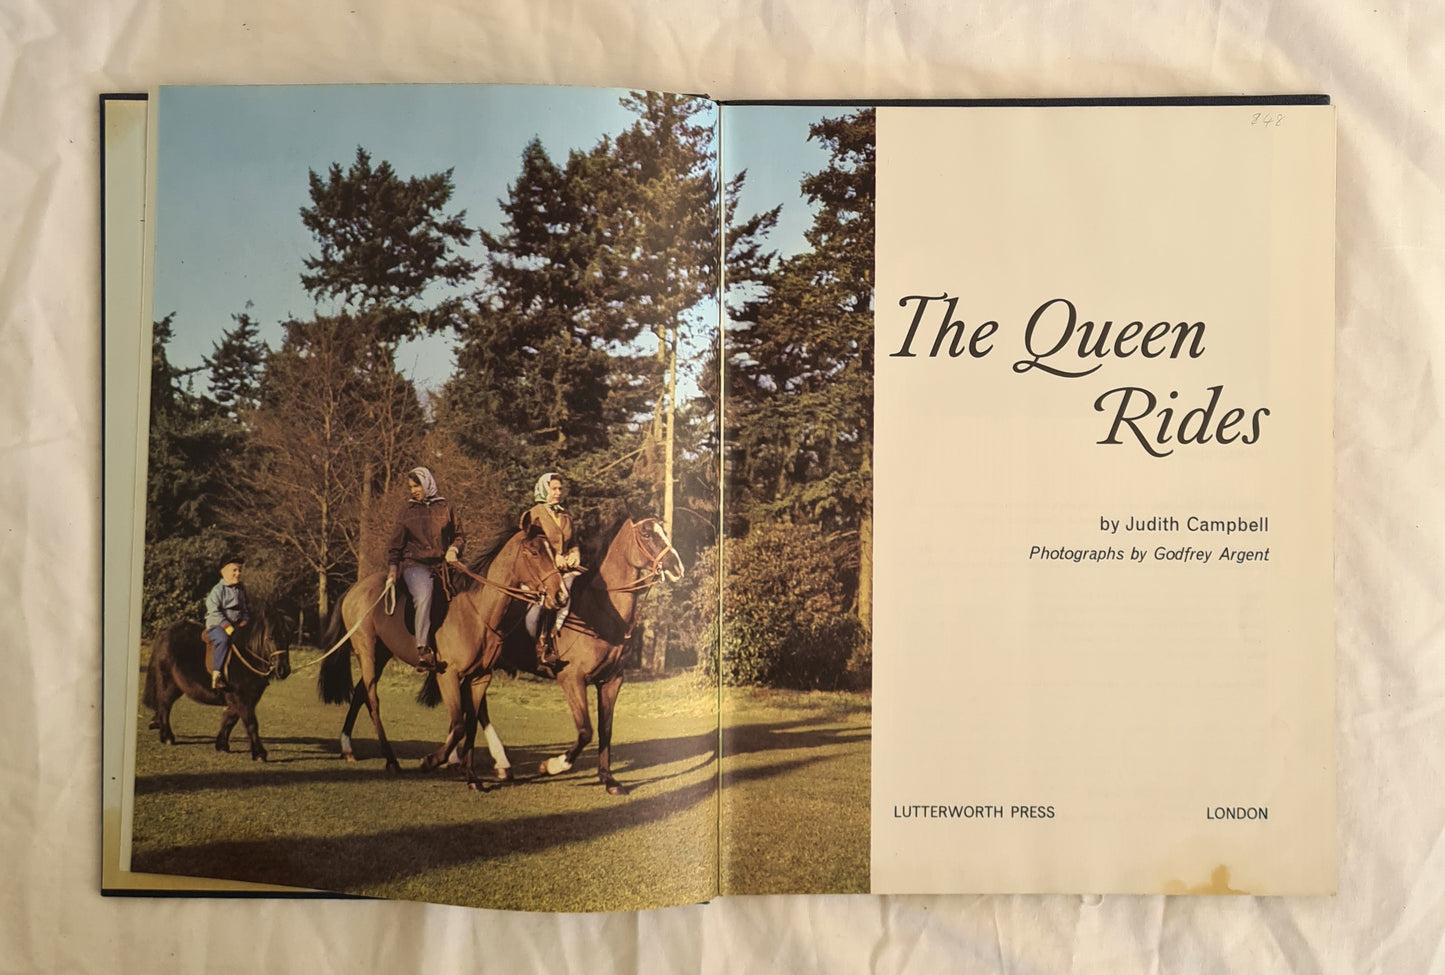 The Queen Rides  by Judith Campbell  photographs by Godfrey Argent